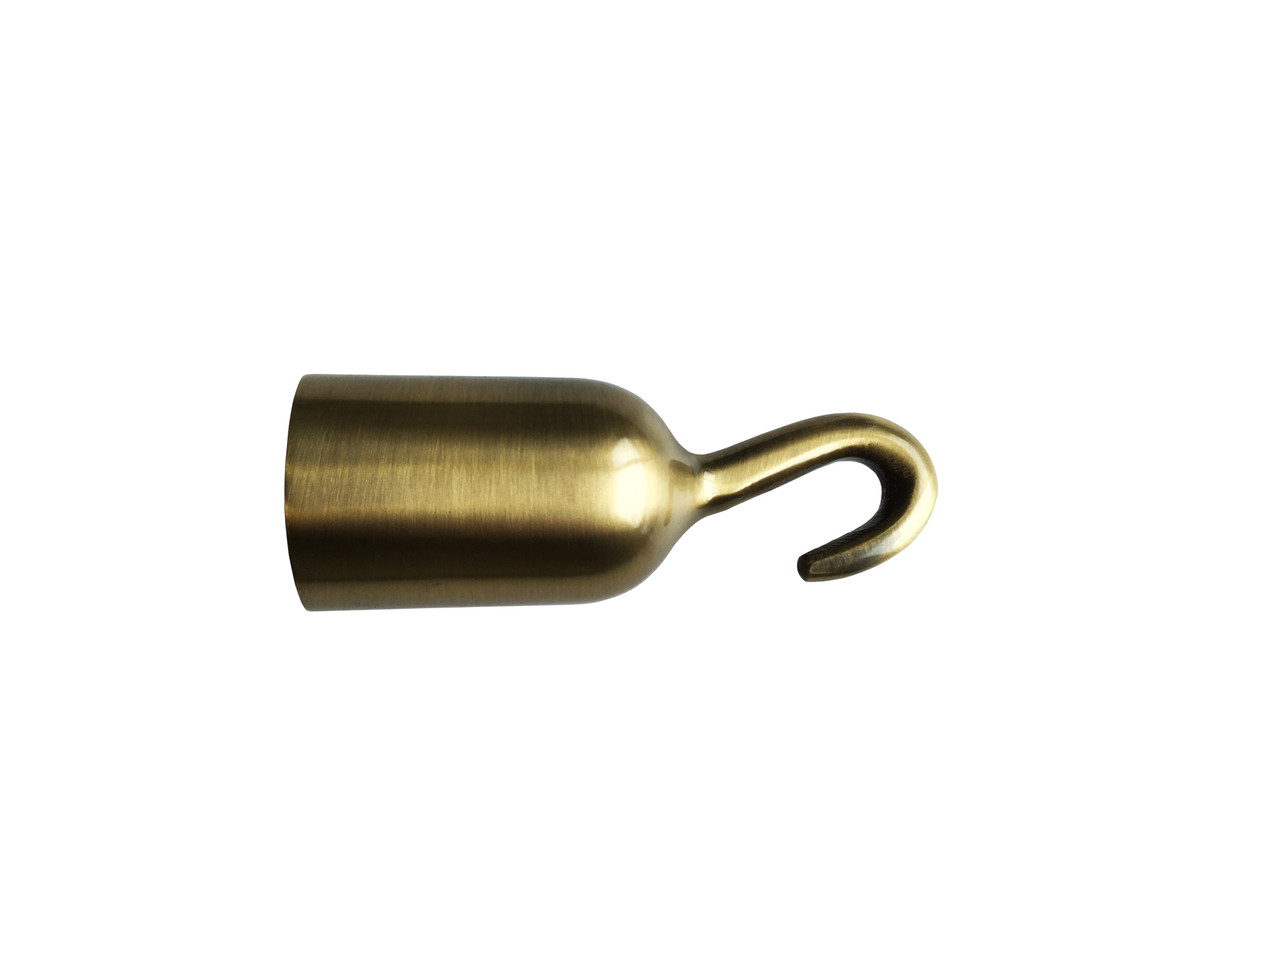 https://cdn11.bigcommerce.com/s-wb8nuy5/images/stencil/1280x1280/products/1261/21067/1.5in_Heavy_Duty_Hook_End_Satin_Brass___52339.1570496409.jpg?c=2?imbypass=on